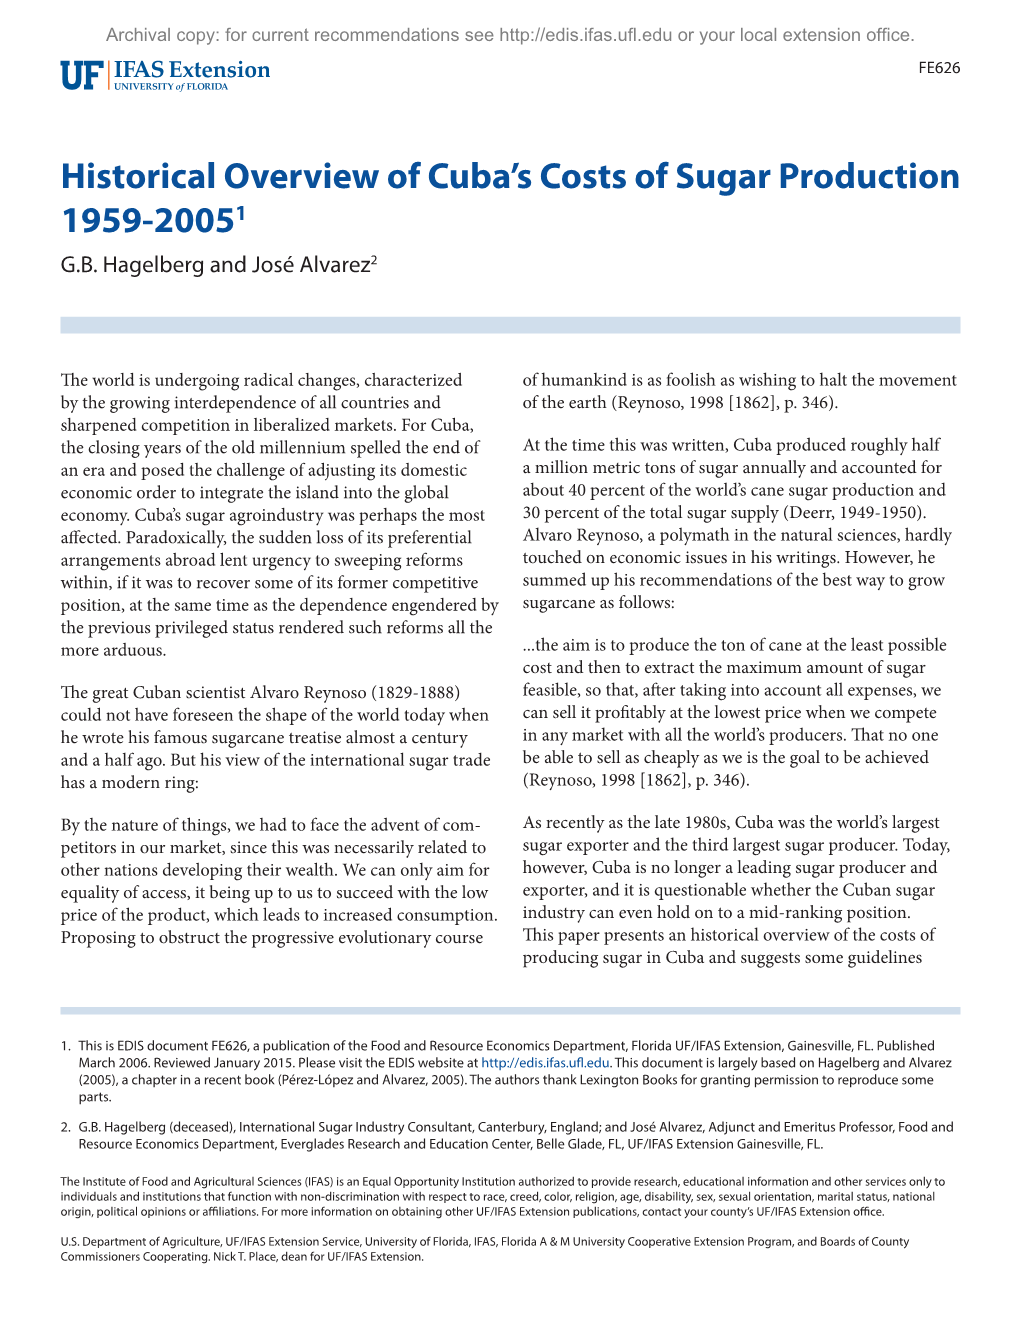 Historical Overview of Cuba's Costs of Sugar Production 1959-20051